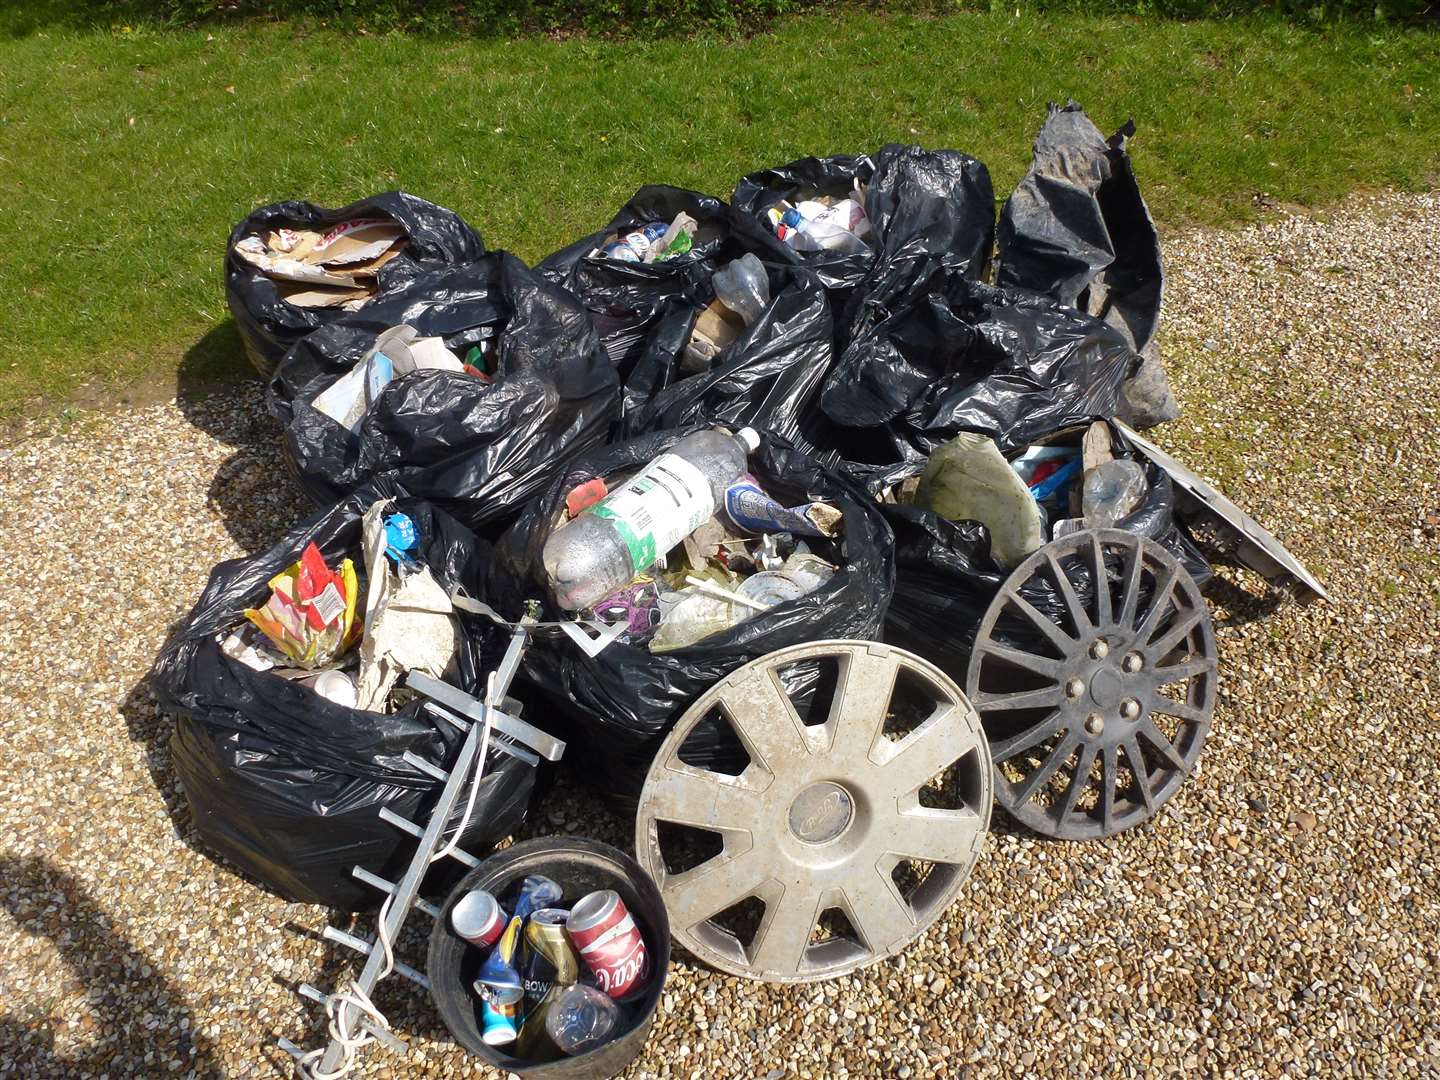 Rubbish collected by volunteers